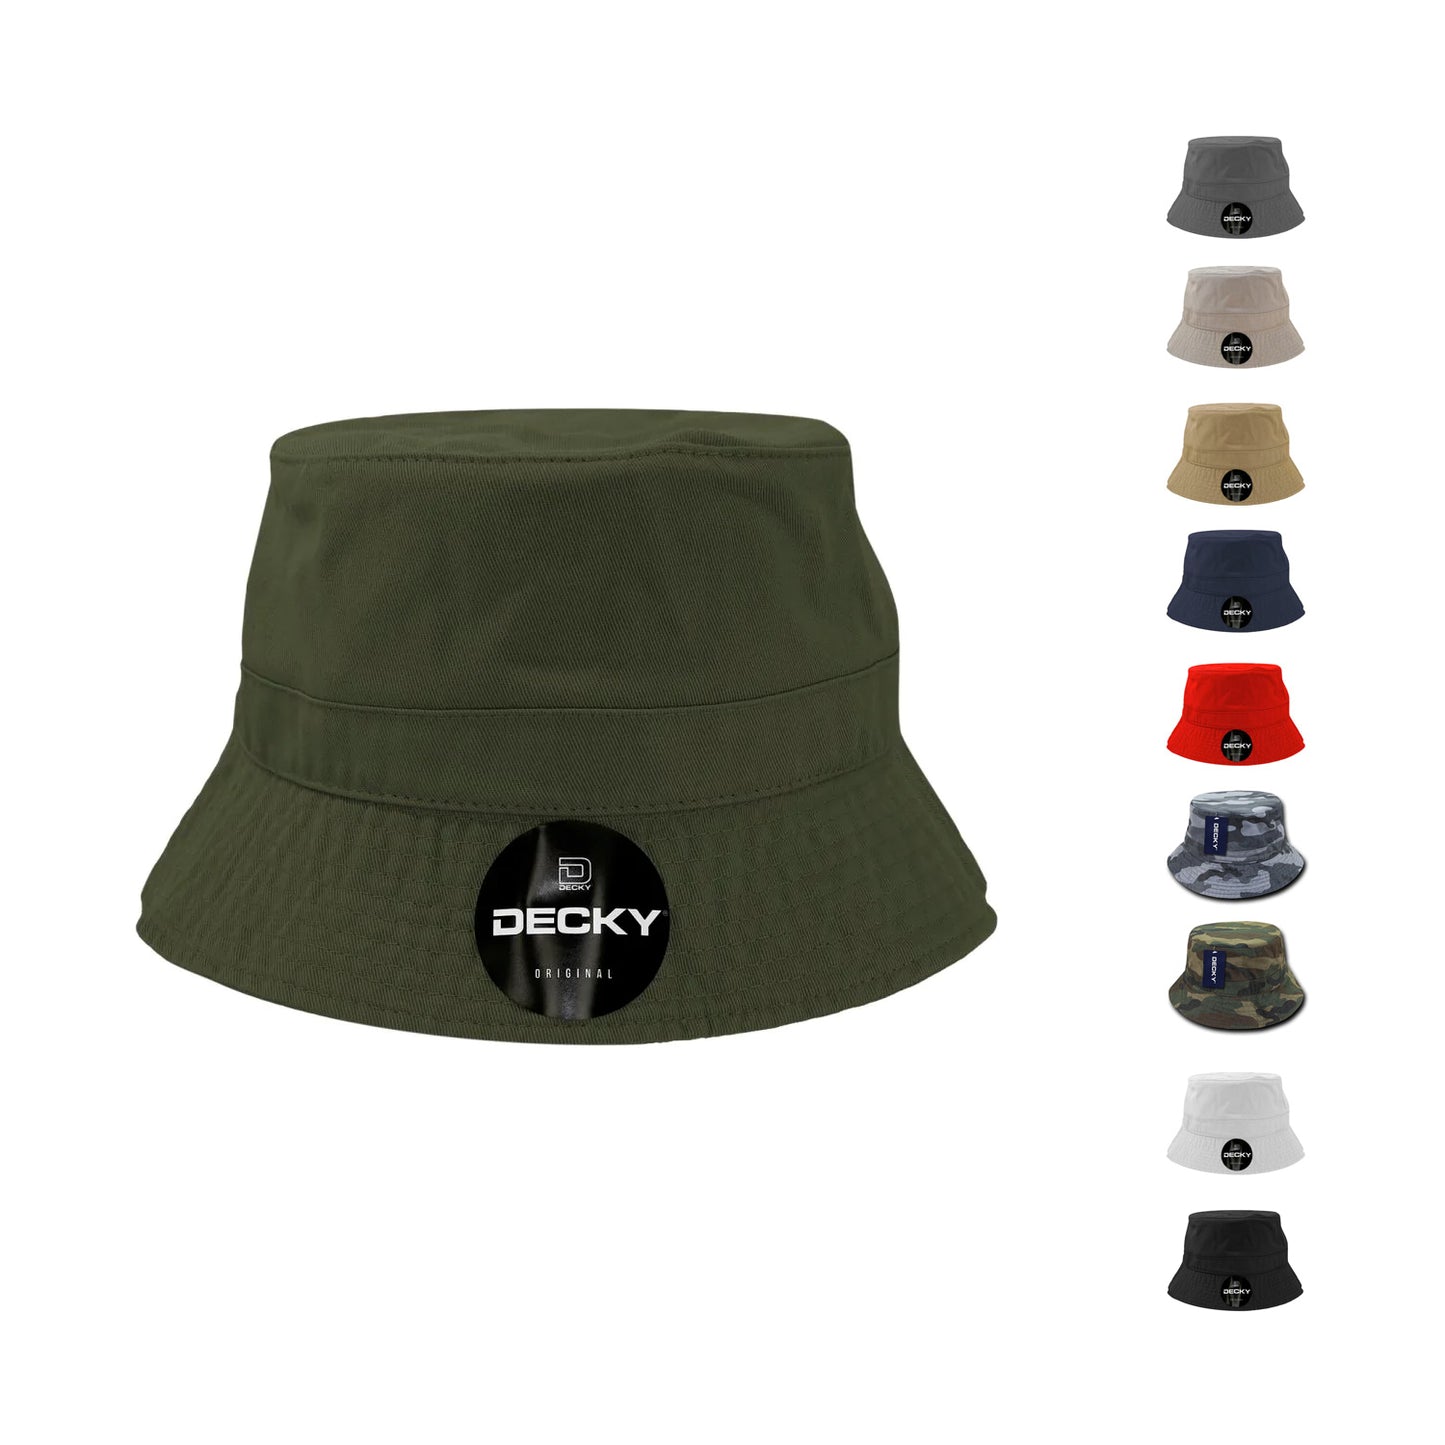 Decky 961 Bucket Hats Relaxed Polo Caps Fishermans Buckets Cotton Blank